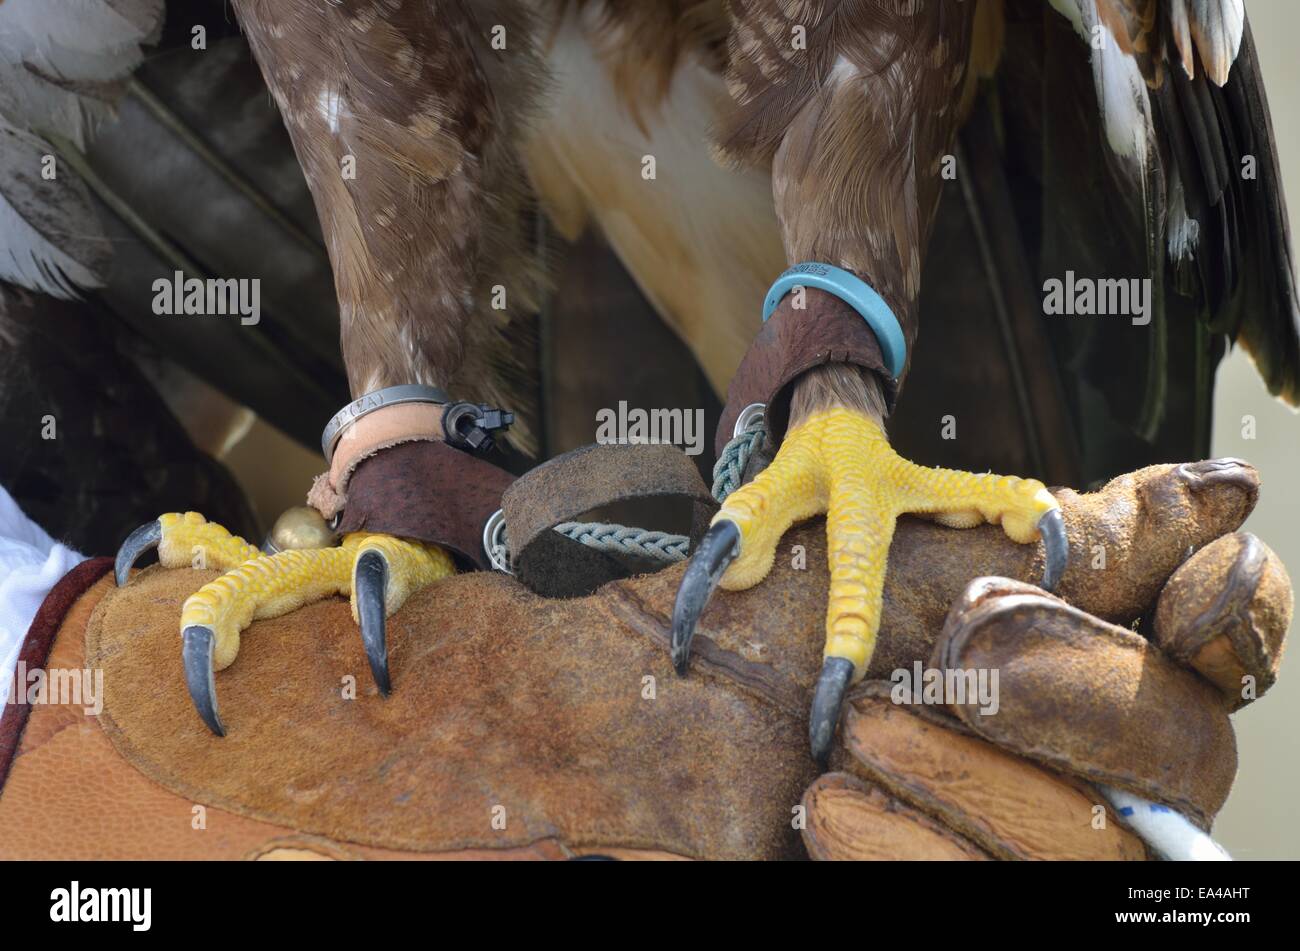 Eagle claws and leather glove Stock Photo